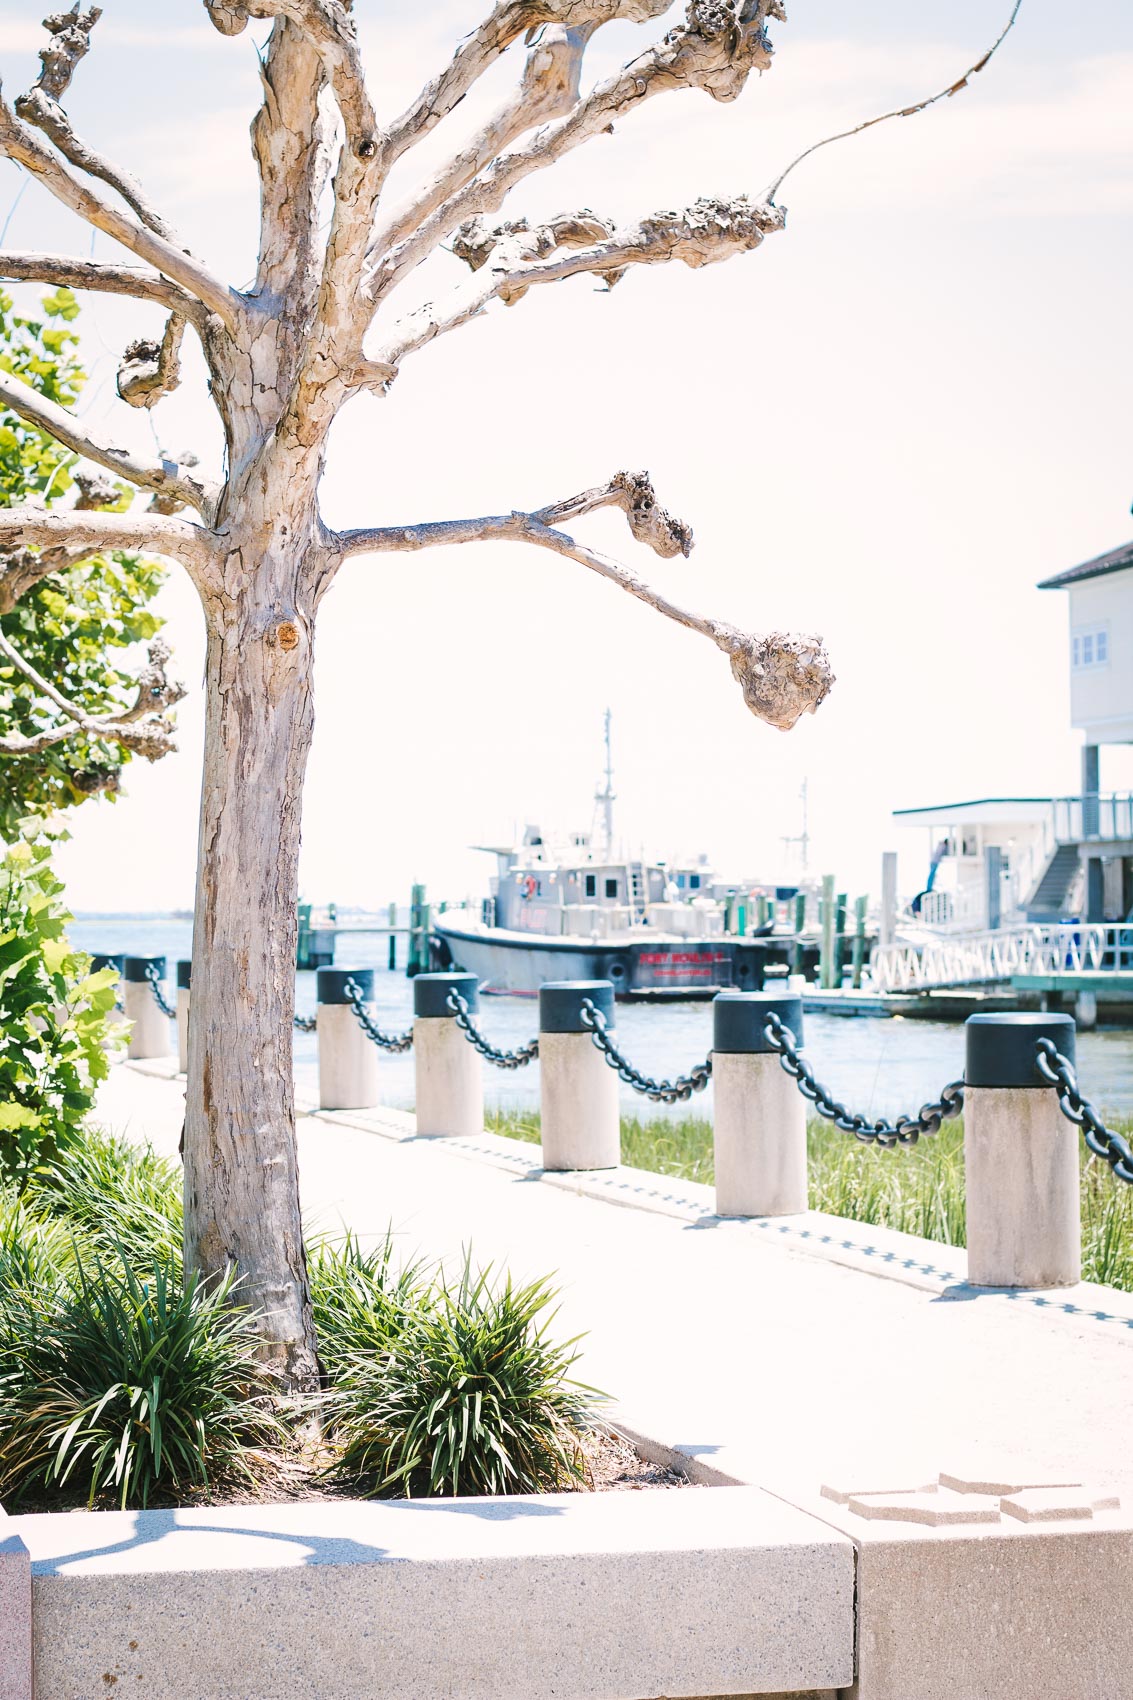 Things to do in Charleston, SC